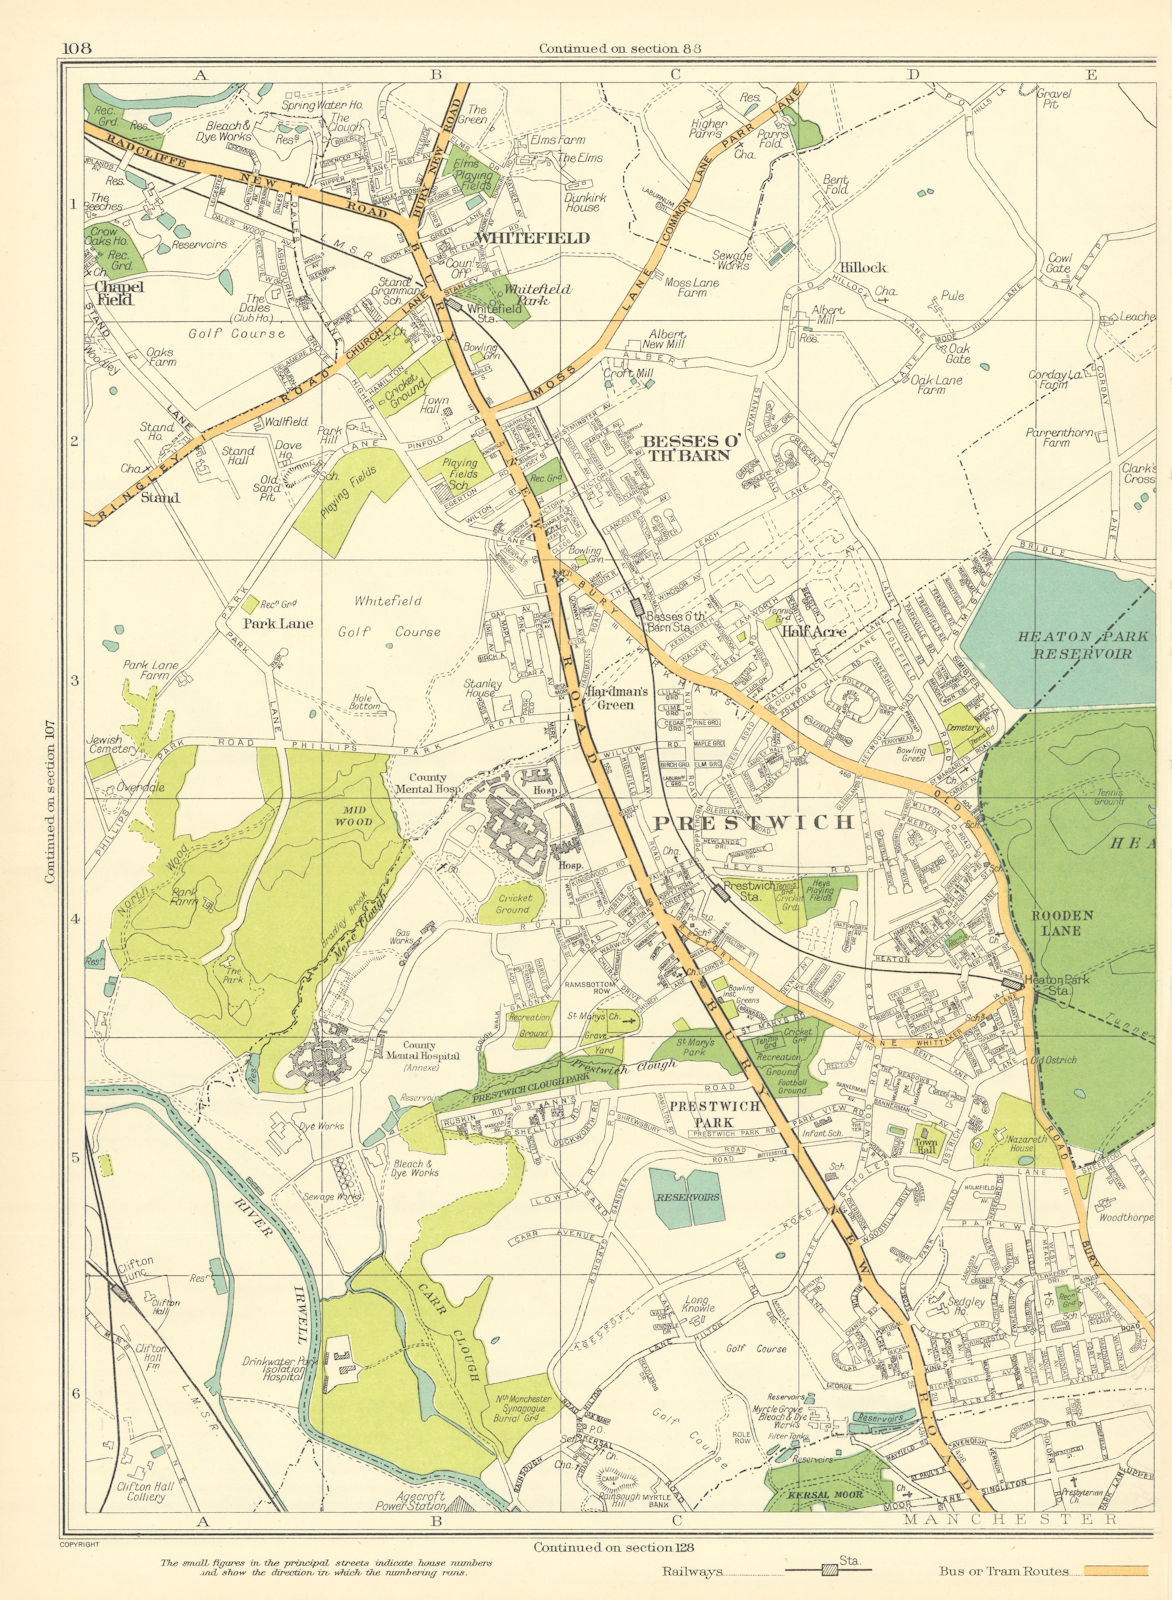 LANCASHIRE Manchester Prestwich Whitefield Half Acre Besses o'Th'Barn 1935 map